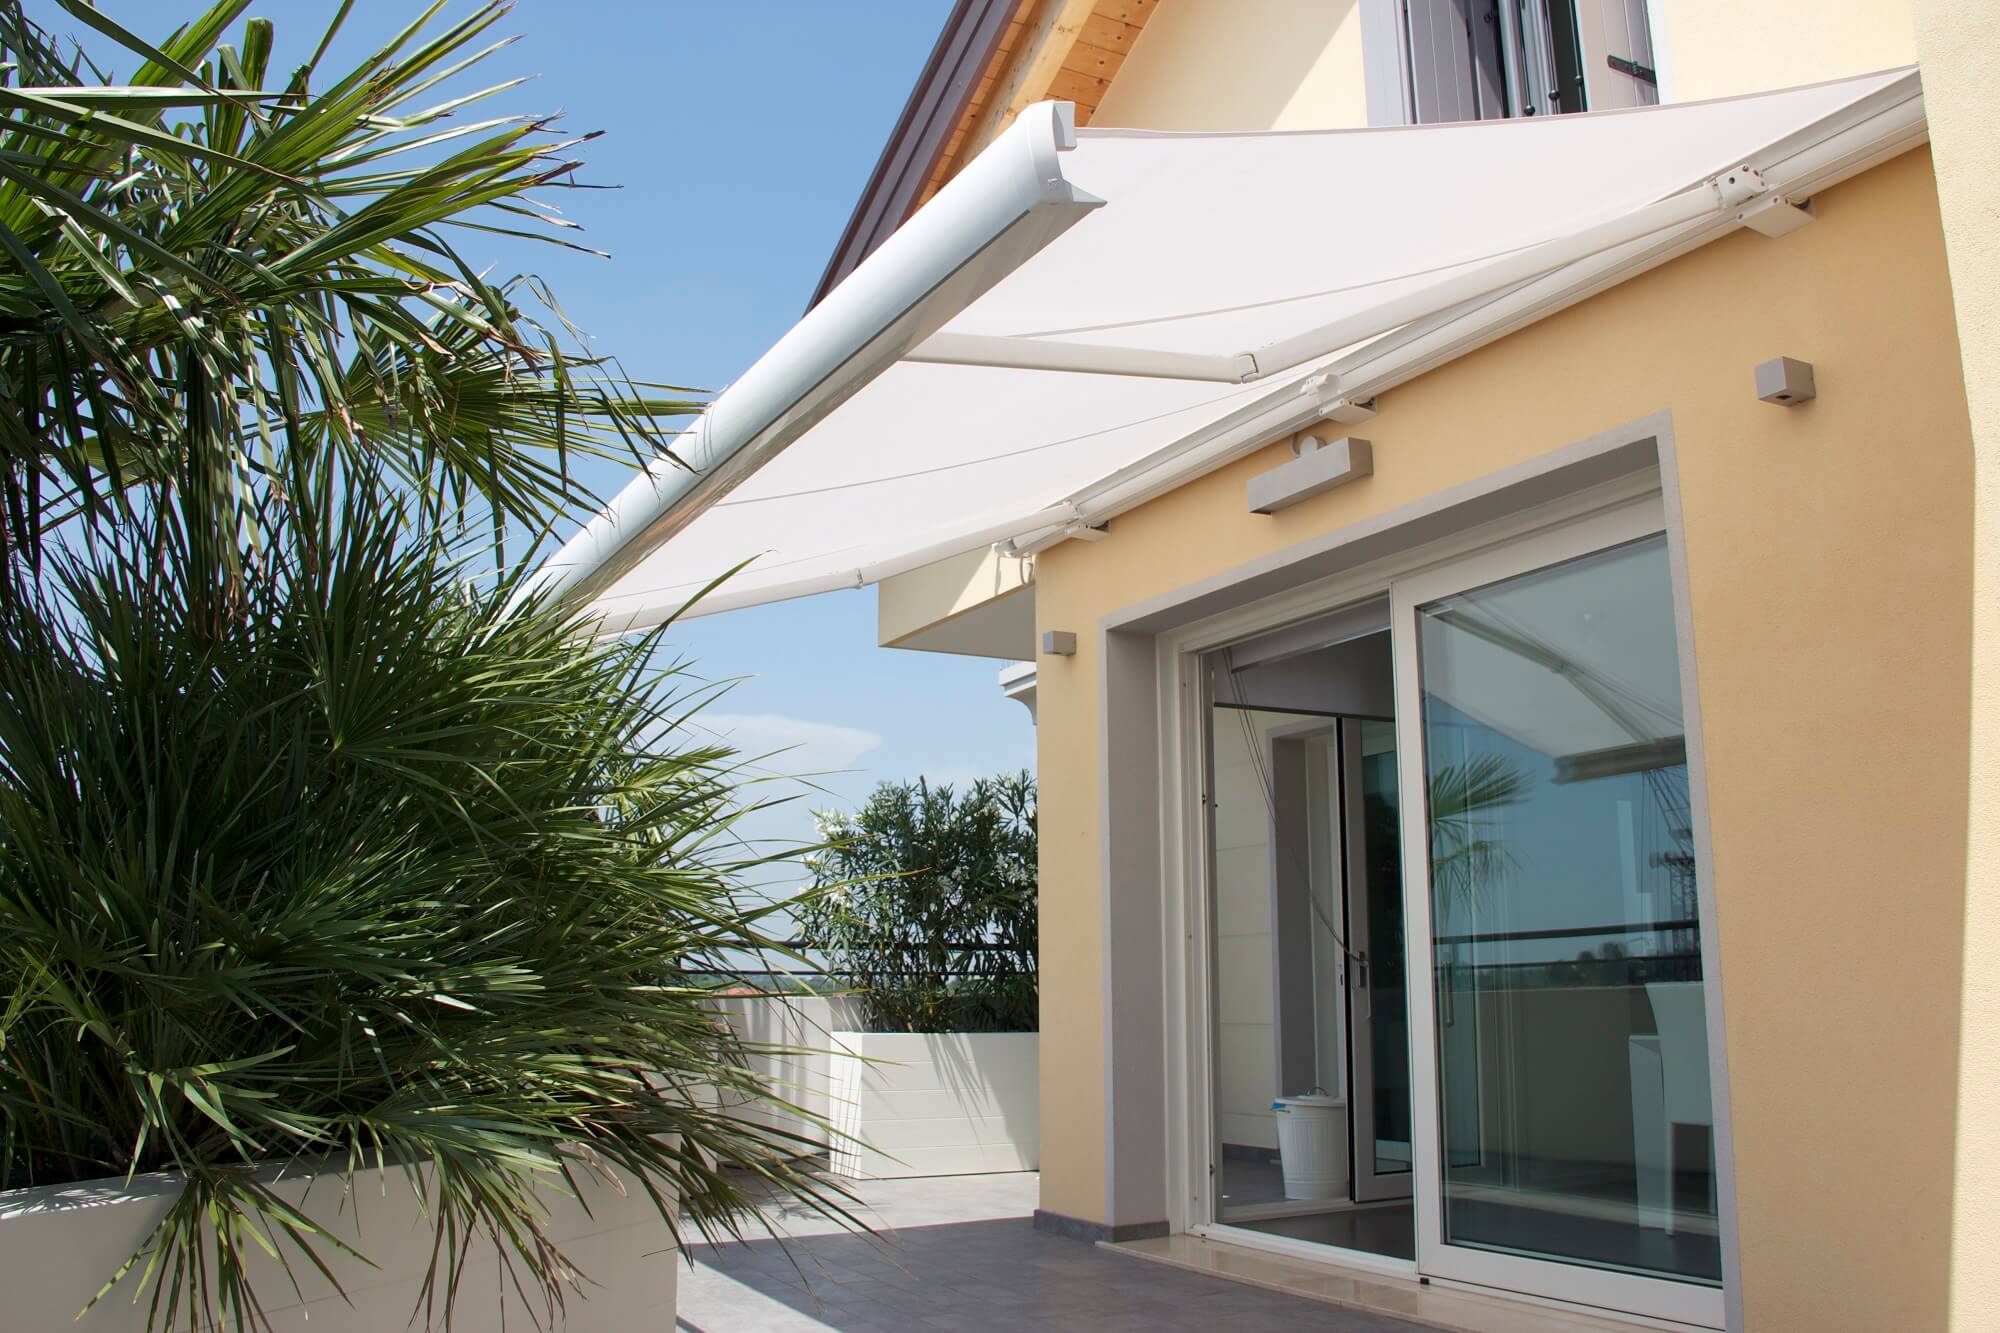 Retractable awning full cassette lateral arm residential awning fully extended